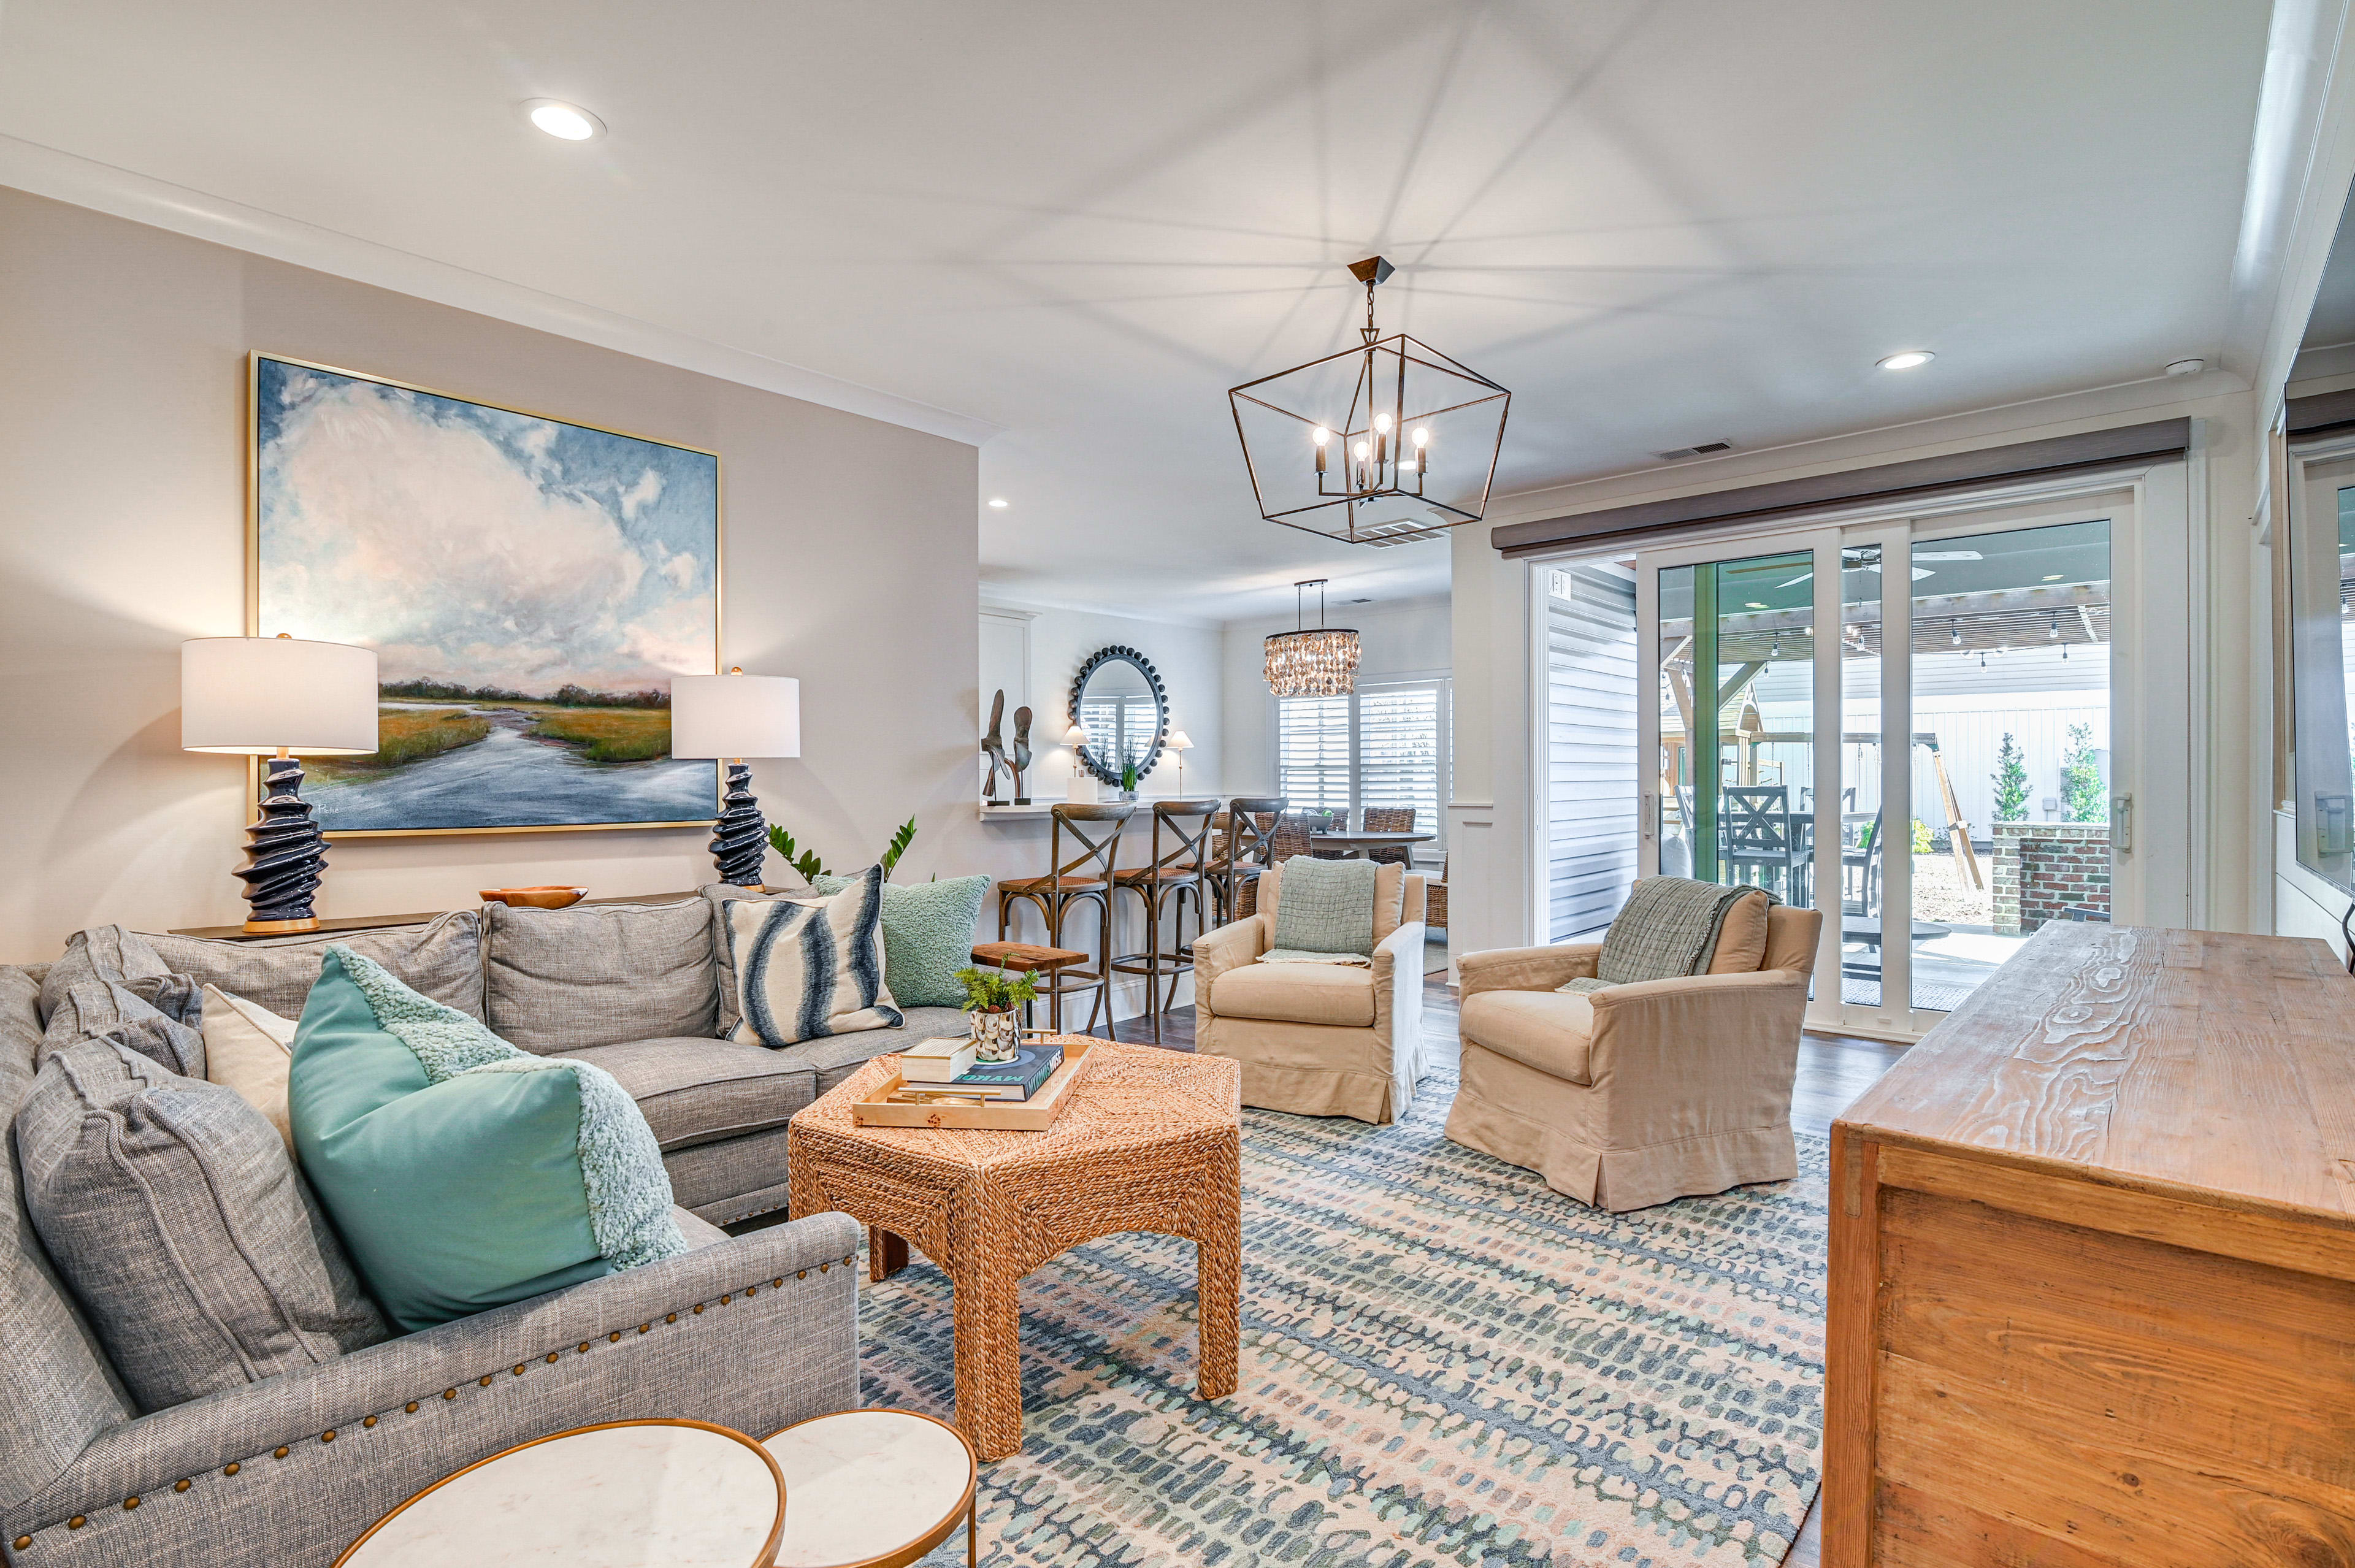 Murrells Inlet Vacation Rental | 4BR | 3BA | 2,110 Sq Ft | 1 Step to Enter